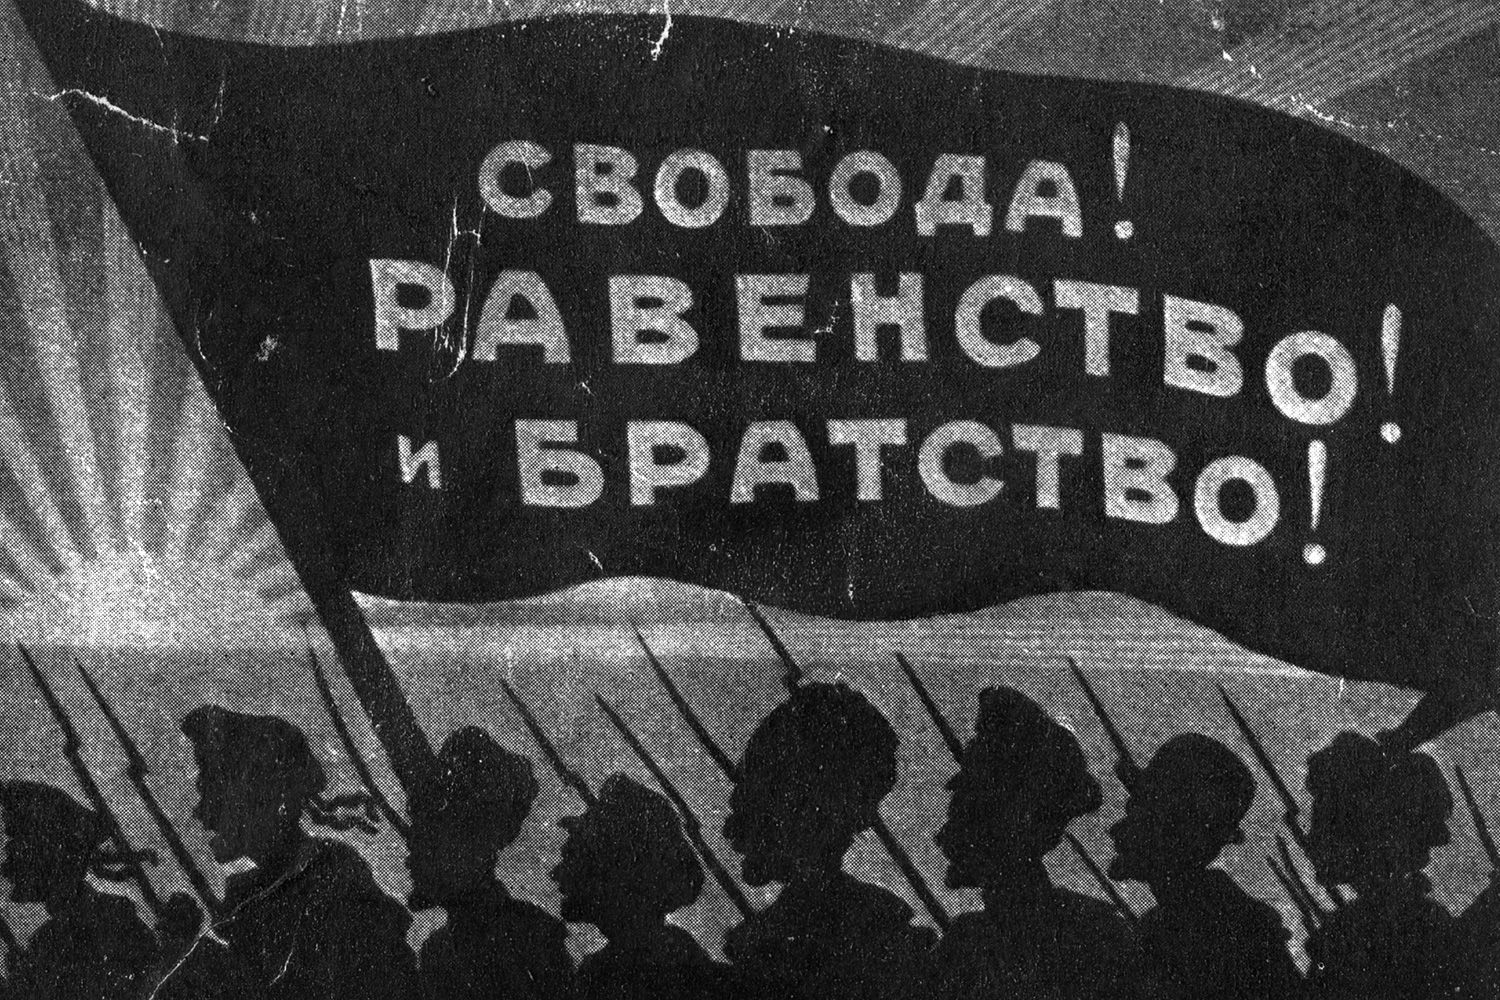 From The First Russian Revolution 55